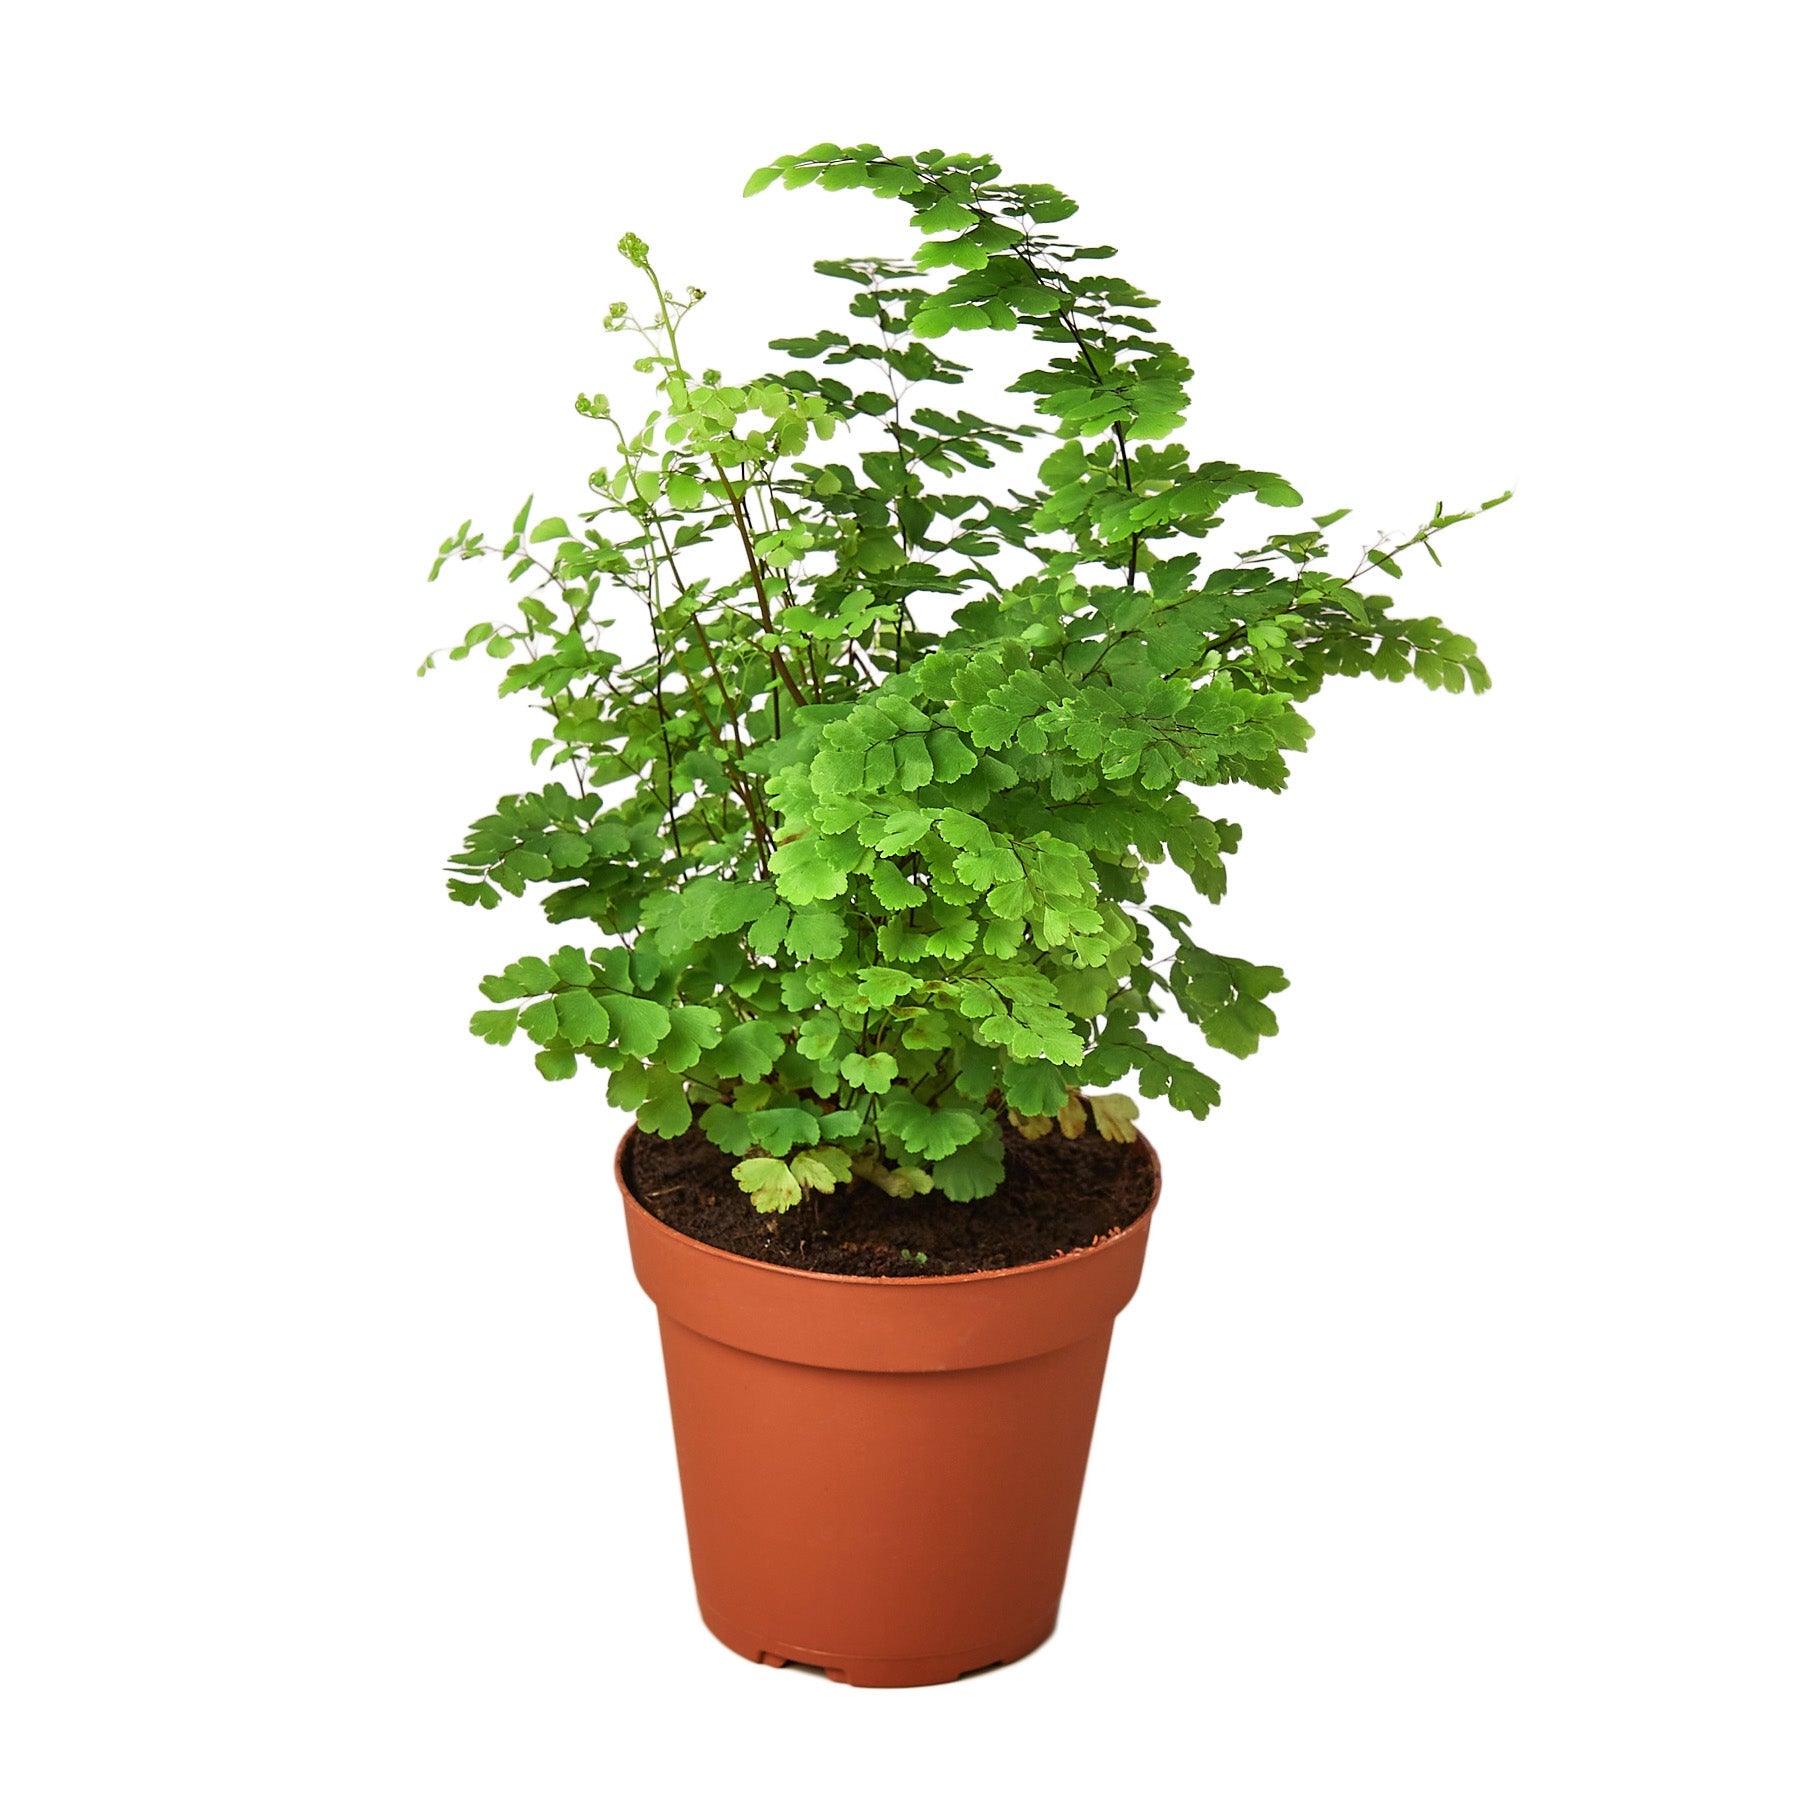 A small plant in a pot placed on a white background at one of the top garden centers near me.